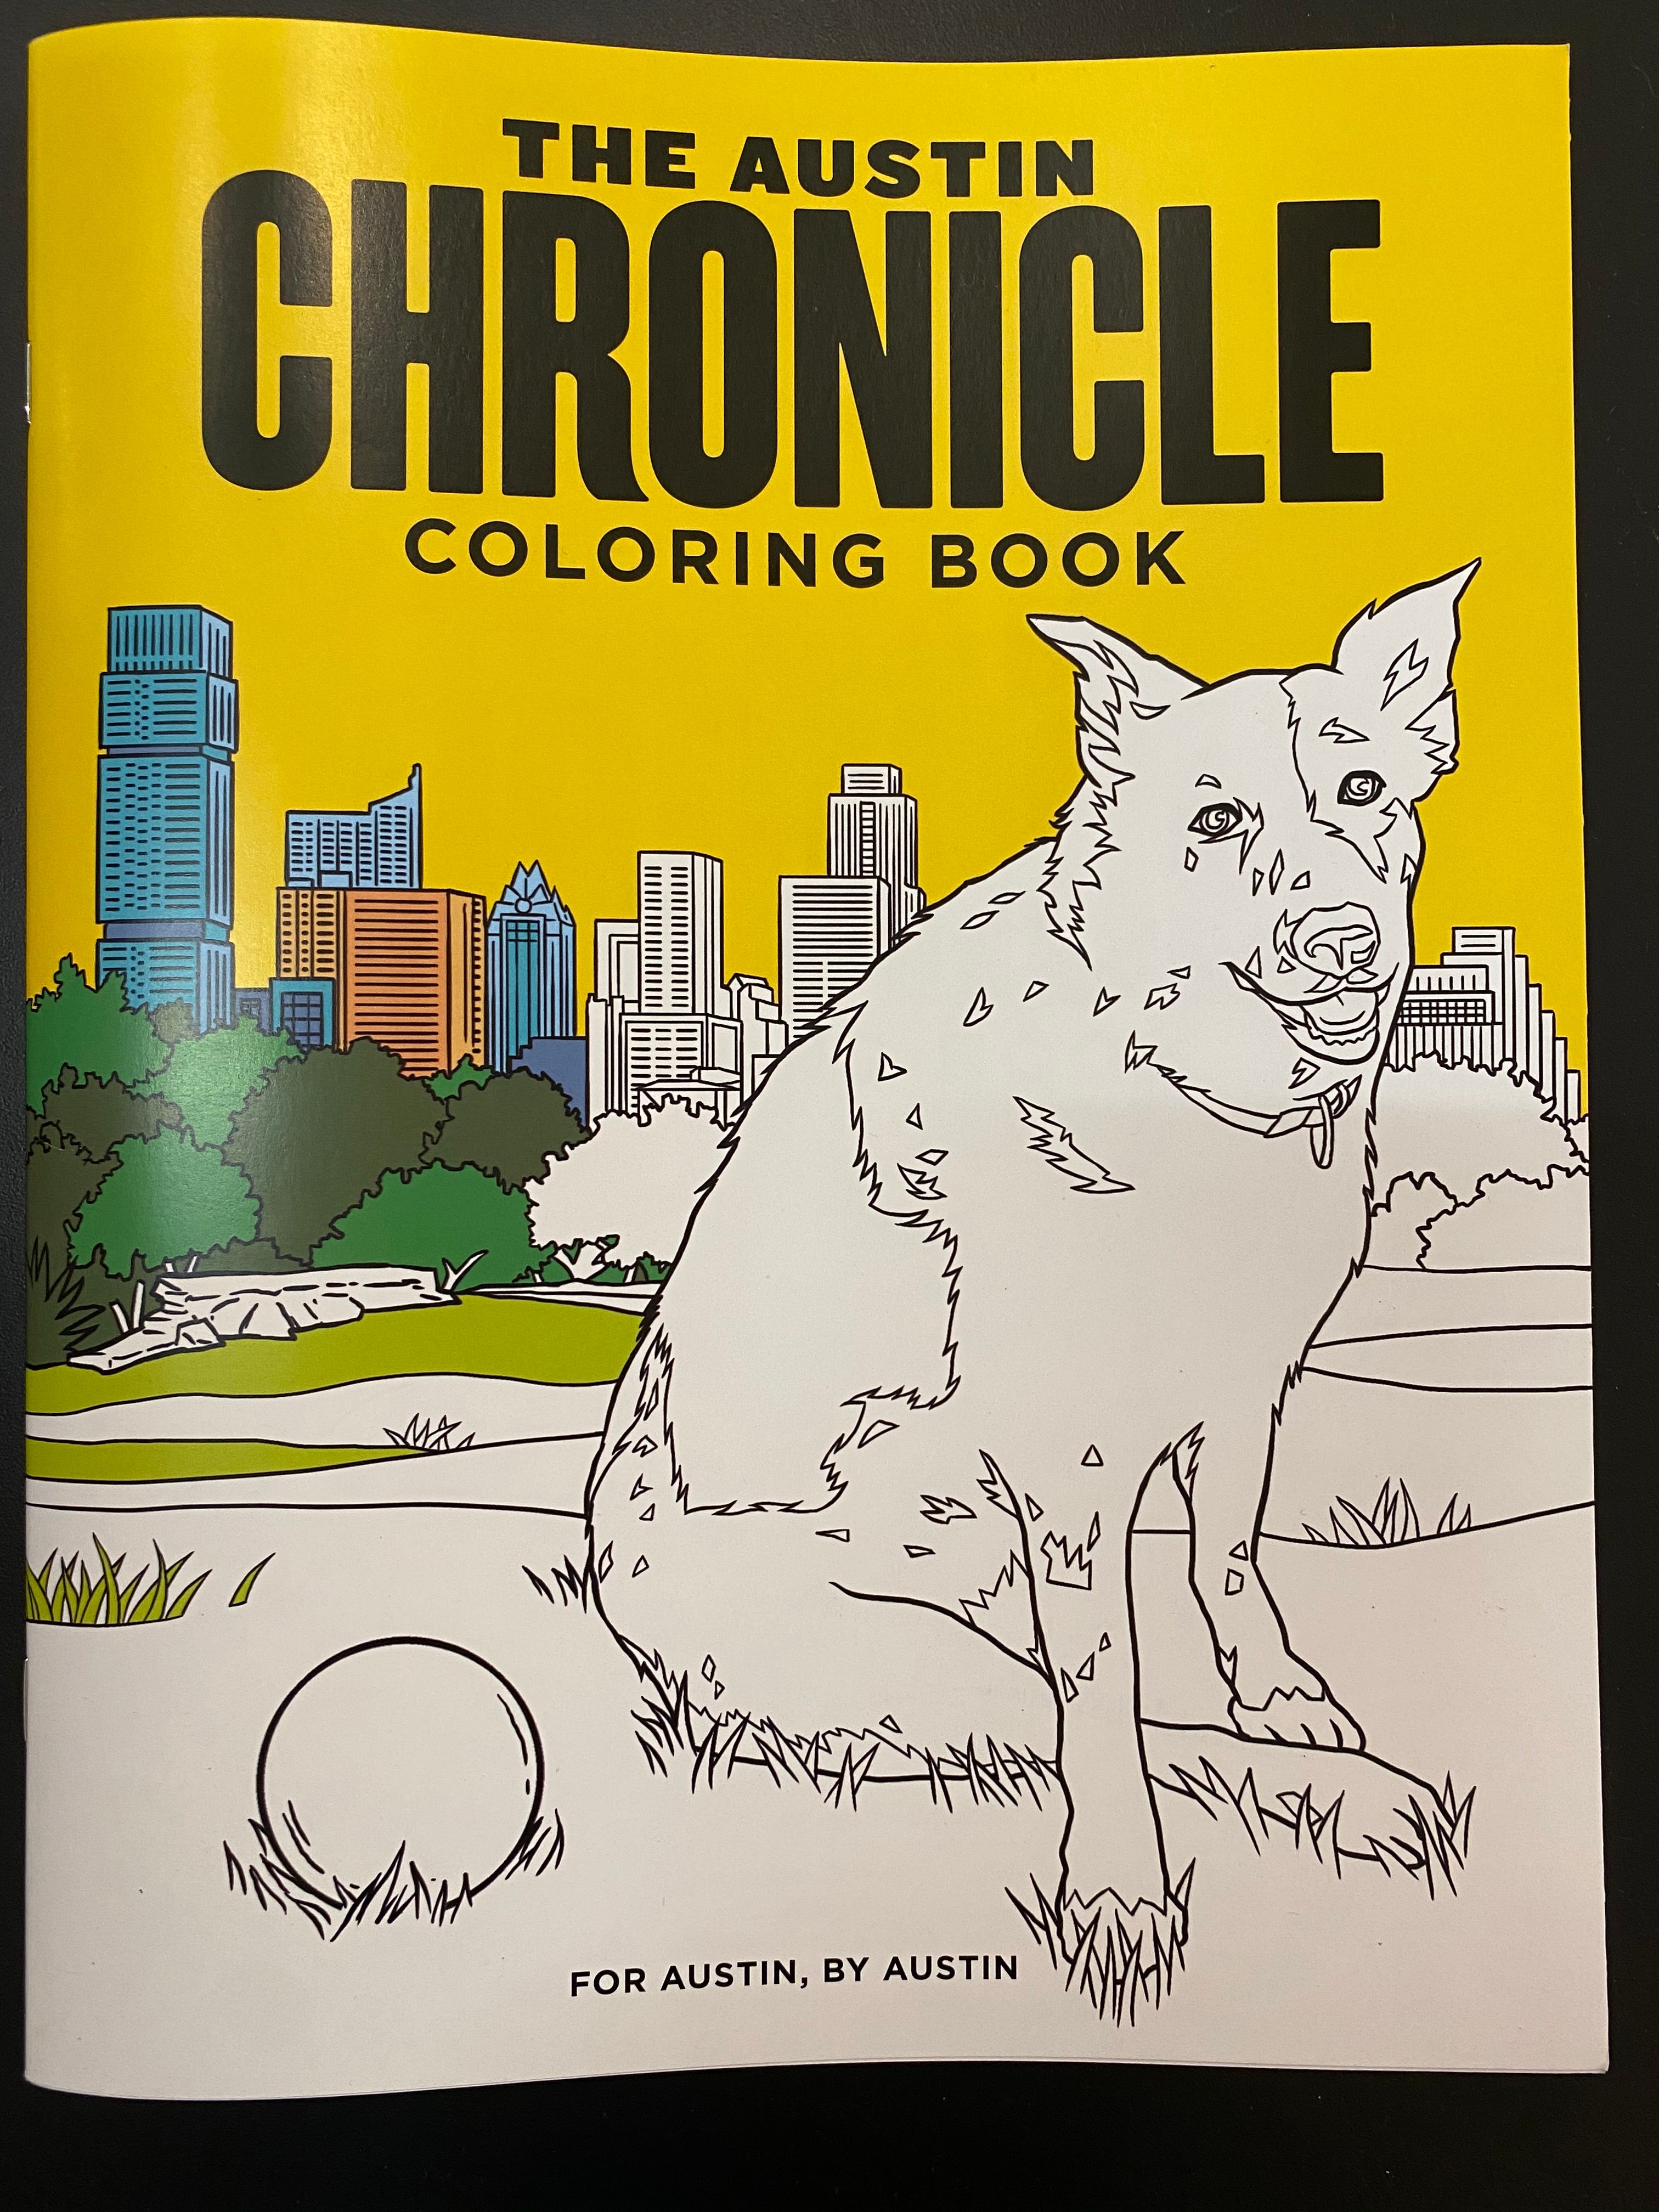 The Austin Chronicle Coloring Book